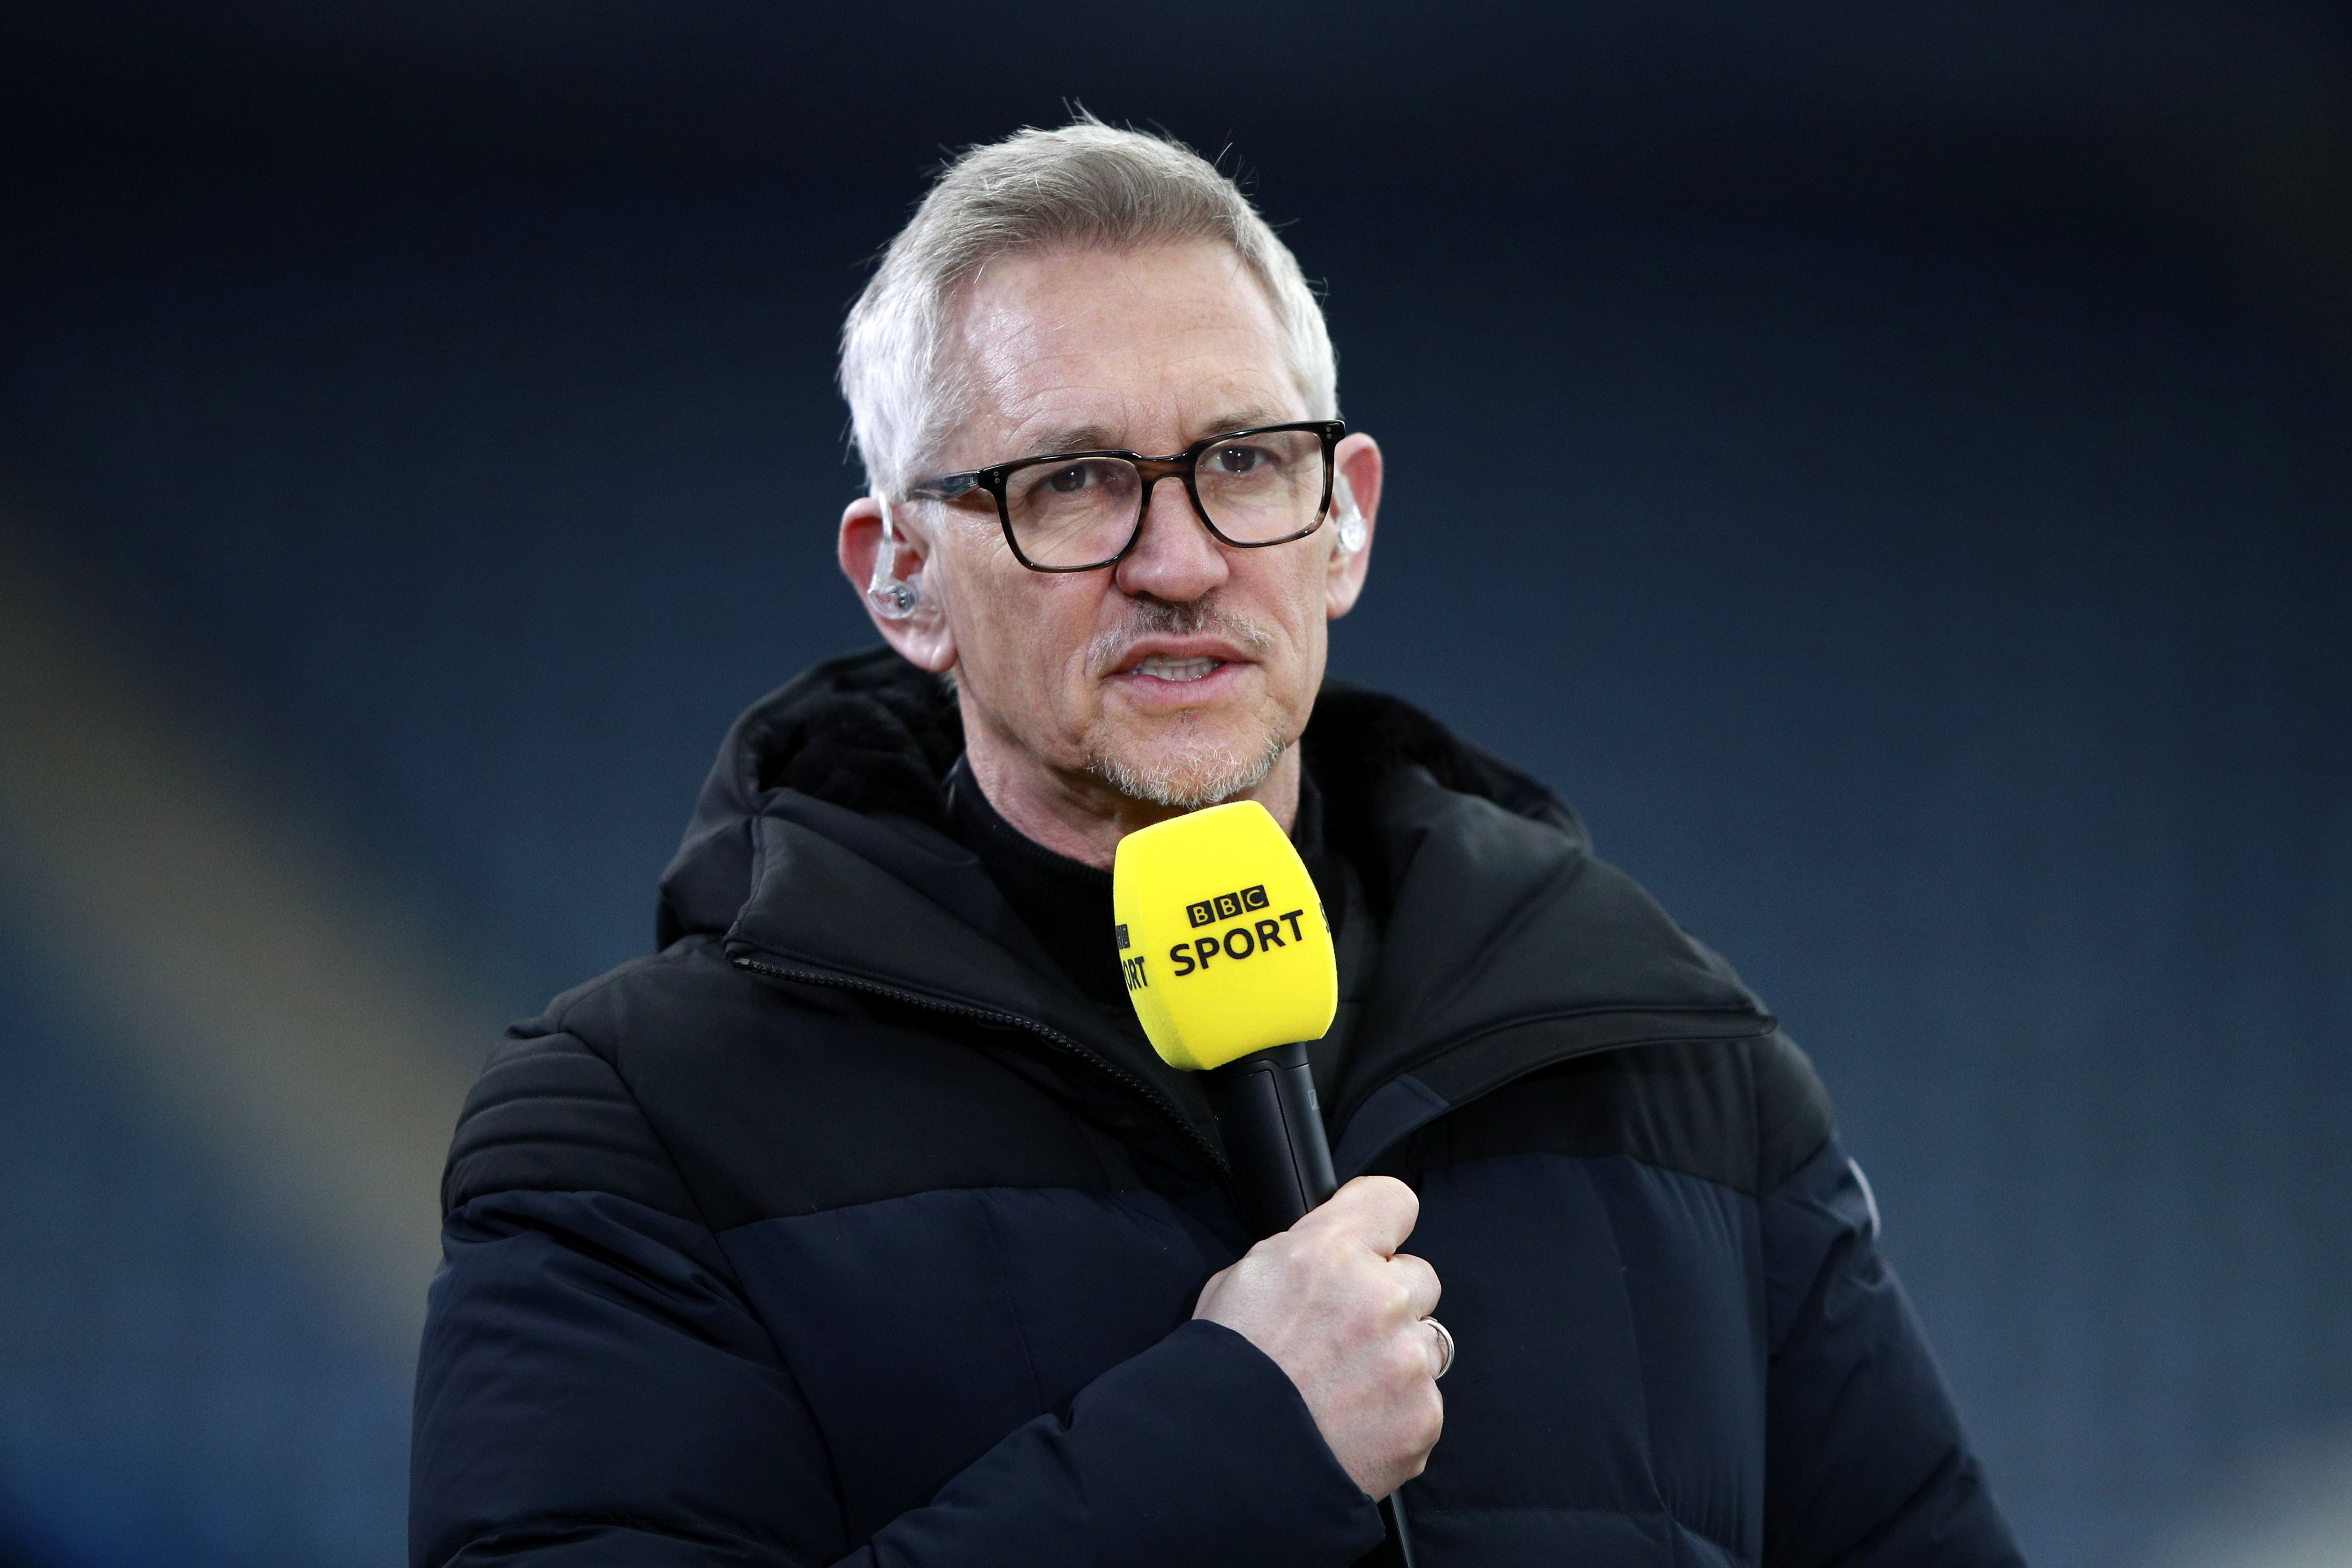 Gary Lineker returned to Match of the Day after being asked to step down